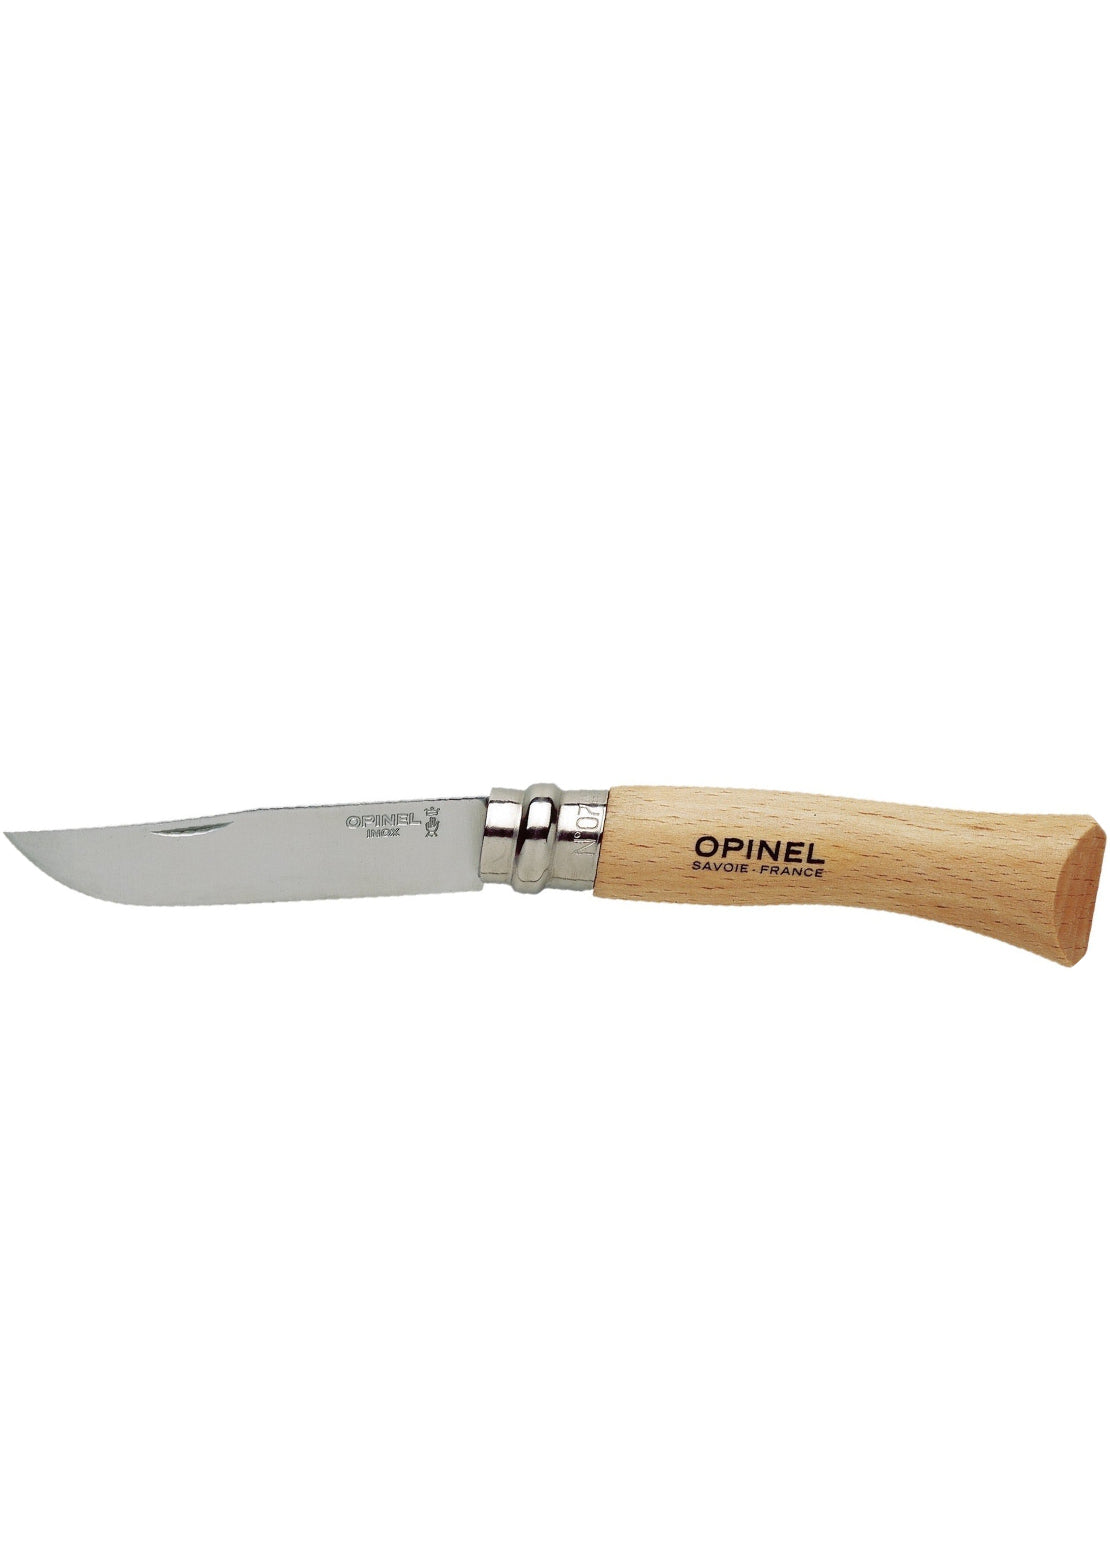 Opinel Tradition N°07 Classic Stainless Steel Knife Beech Wood